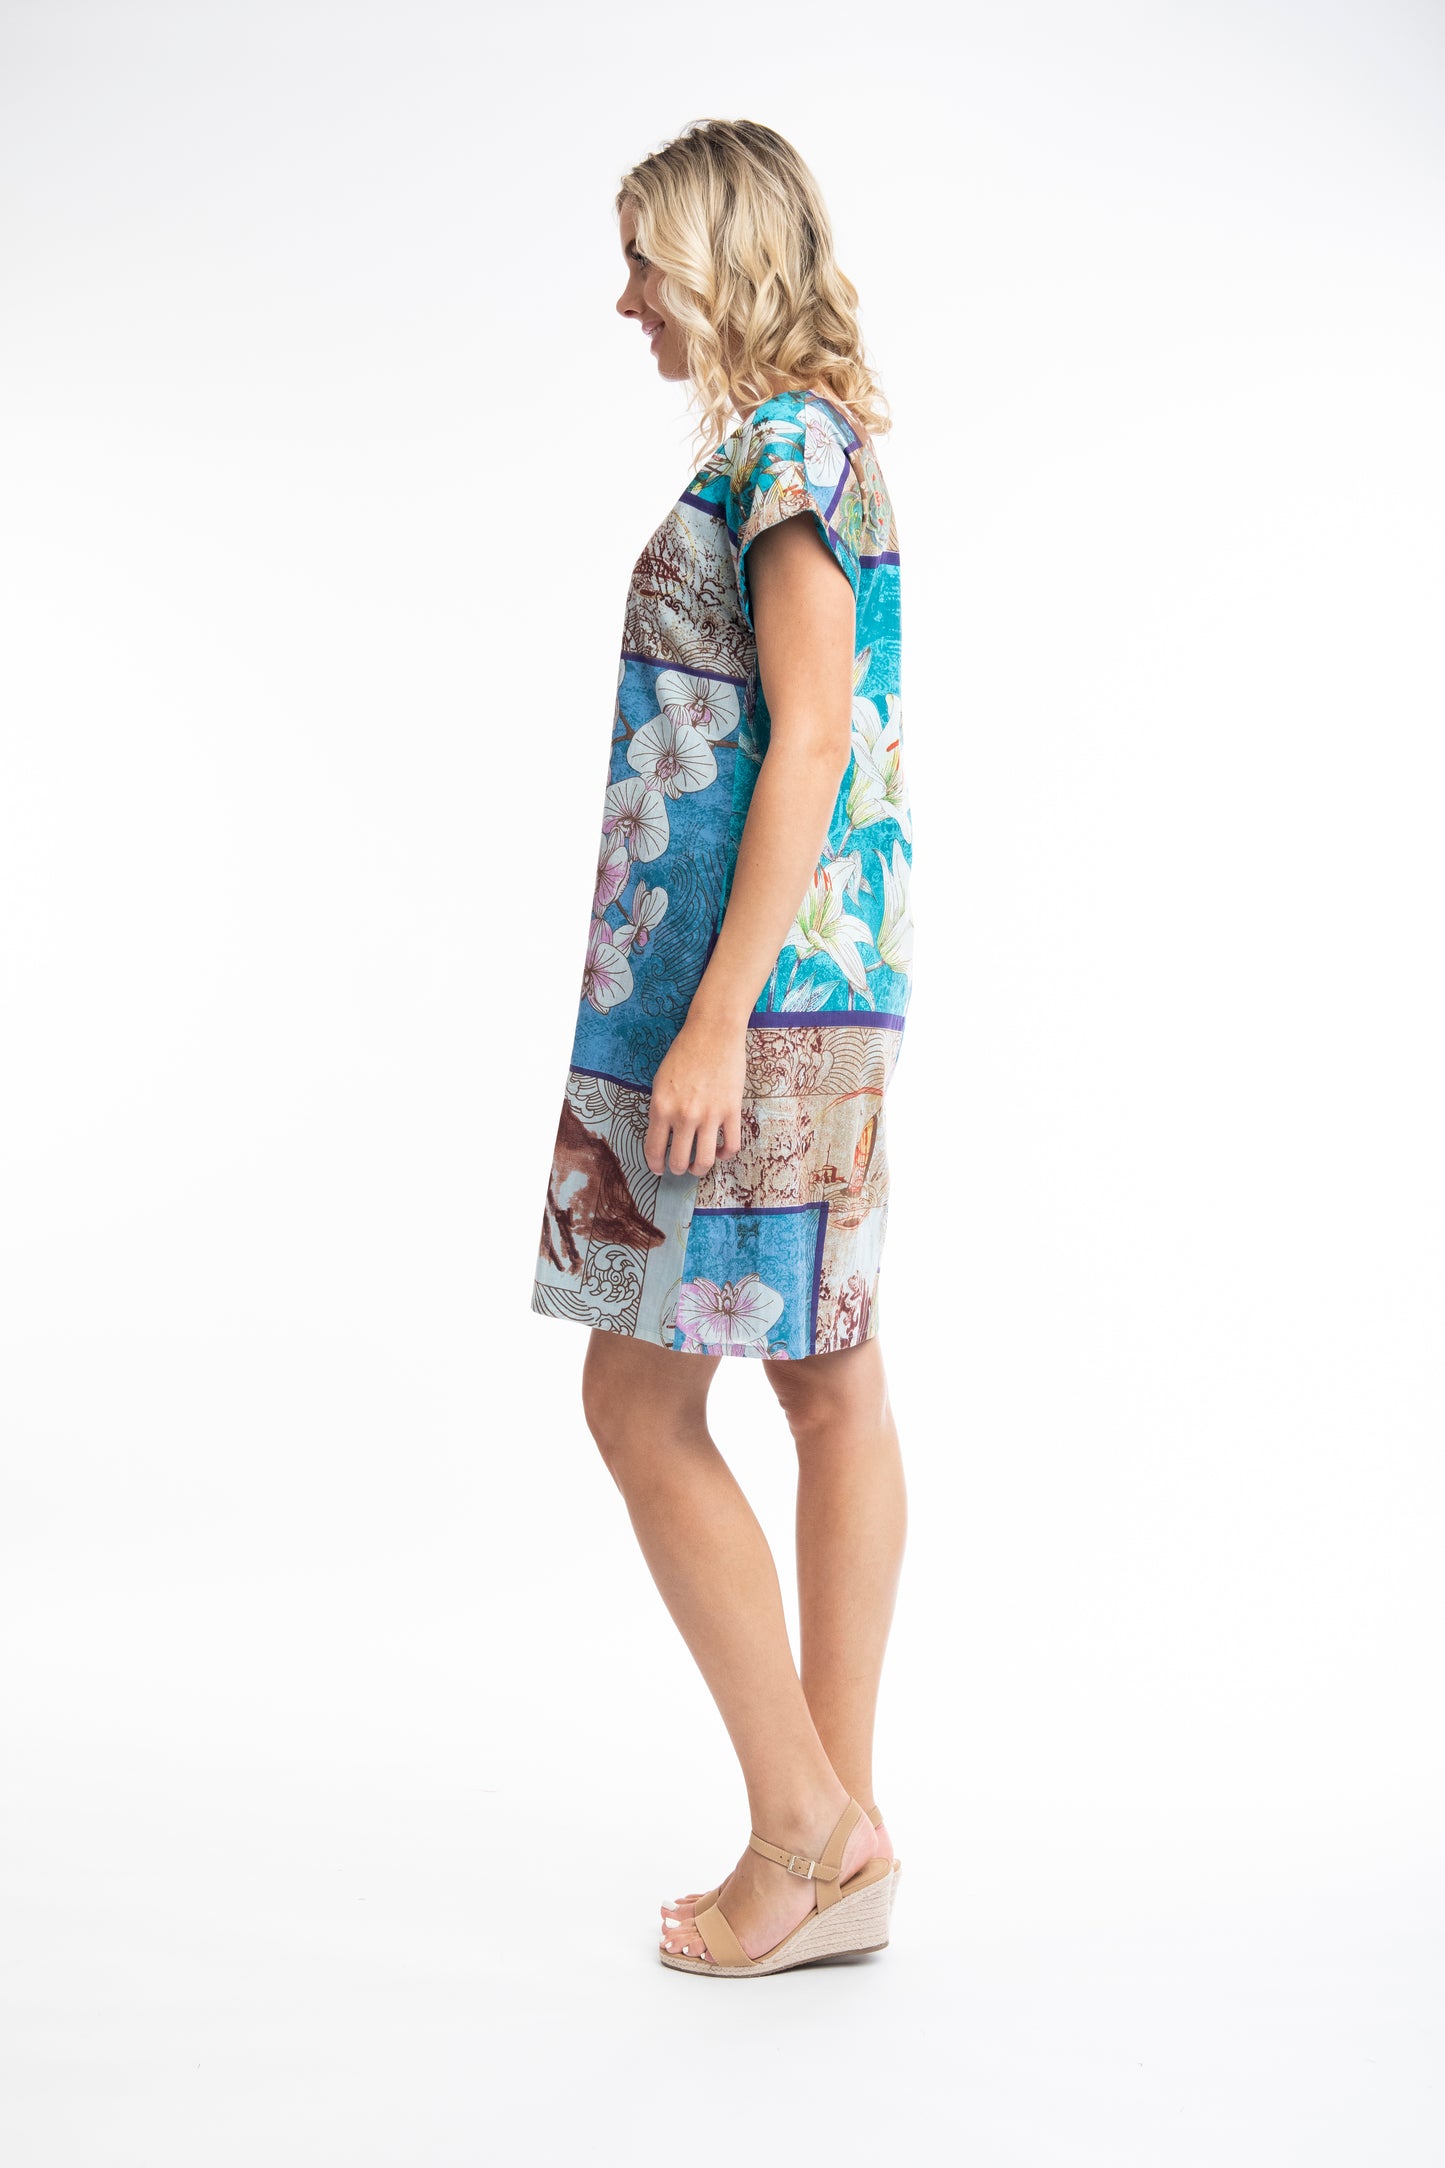 Woman posing in a colorful printed Orientique Leonardo Dress Shift Short Sleeve Reversible with hand raised, smiling against a white background.